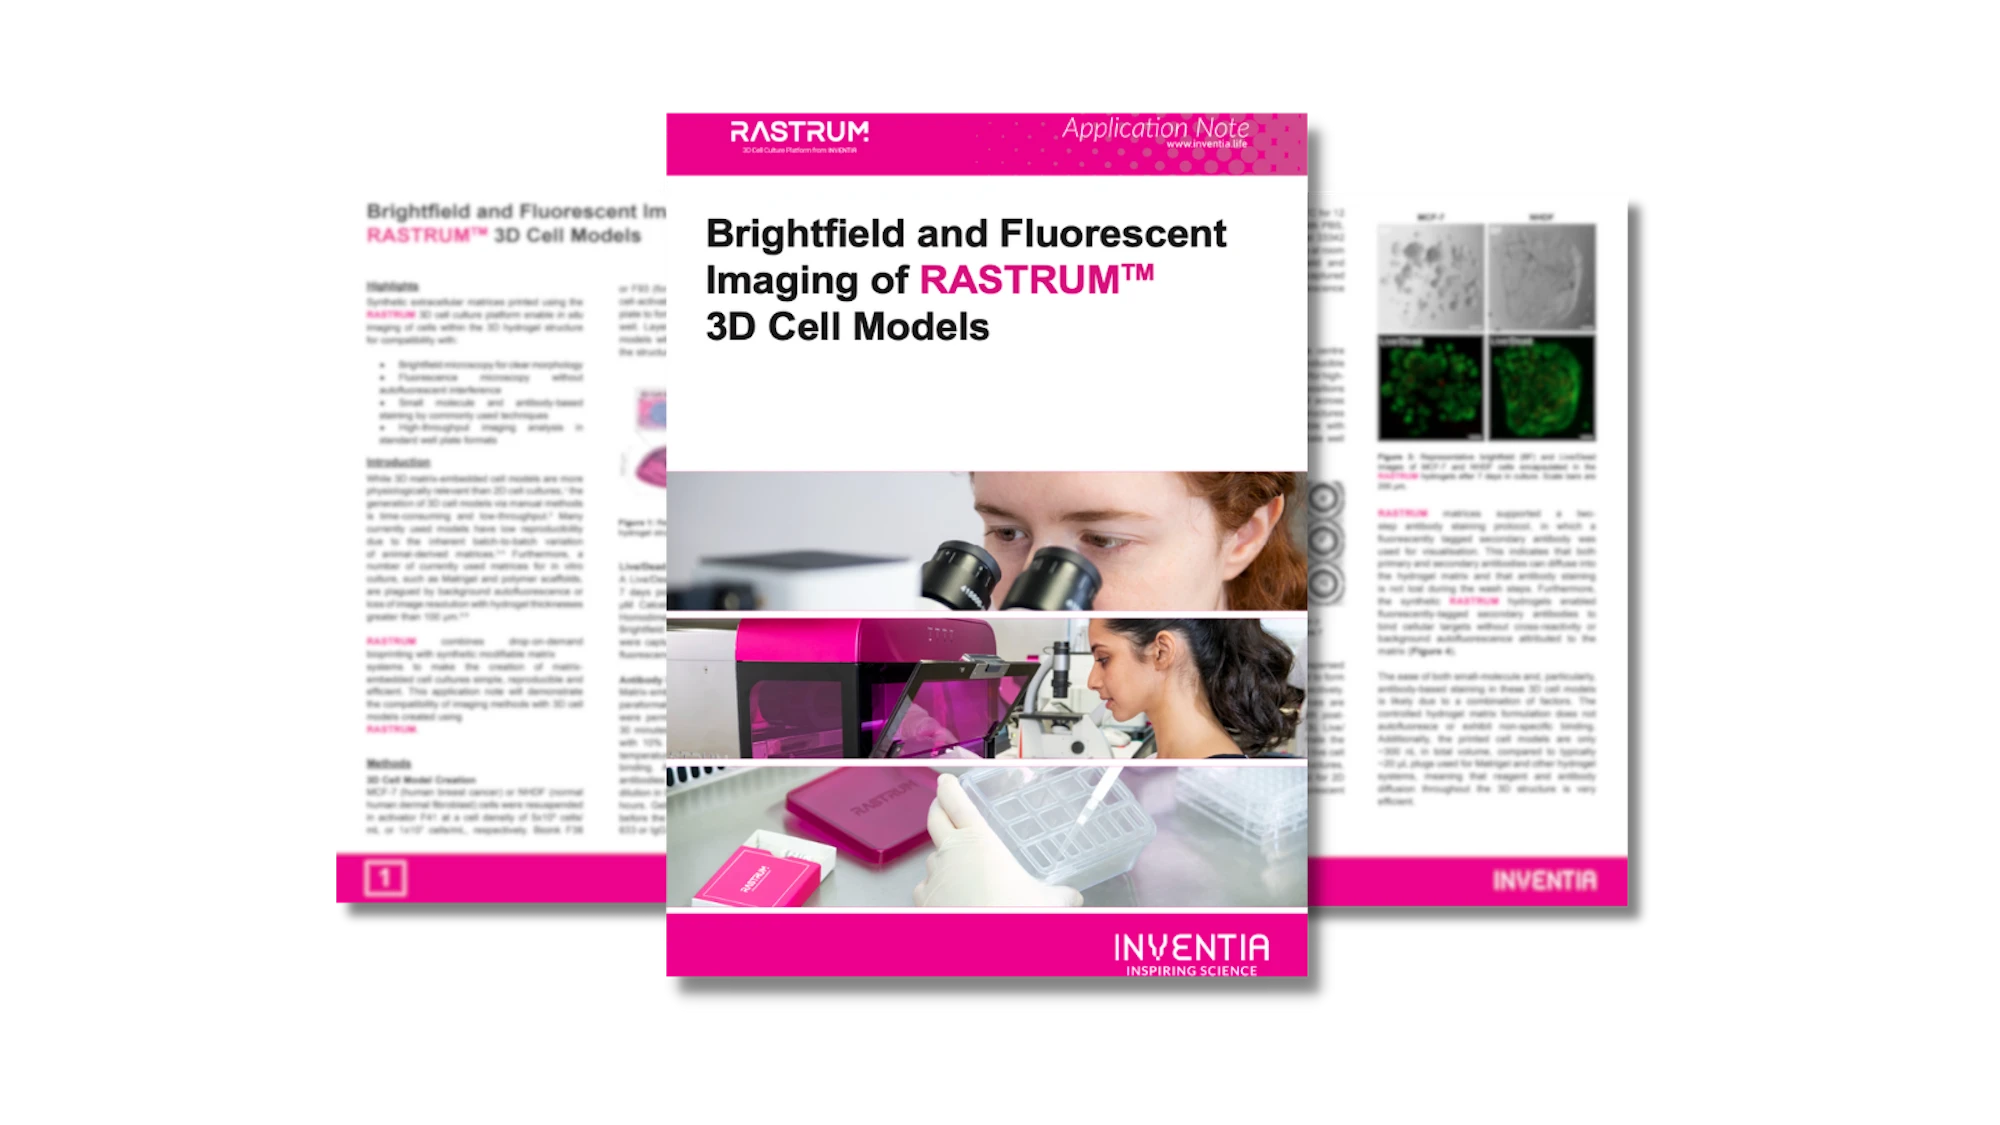 Brightfield and fluorescent imaging of RASTRUM™ 3D cell models